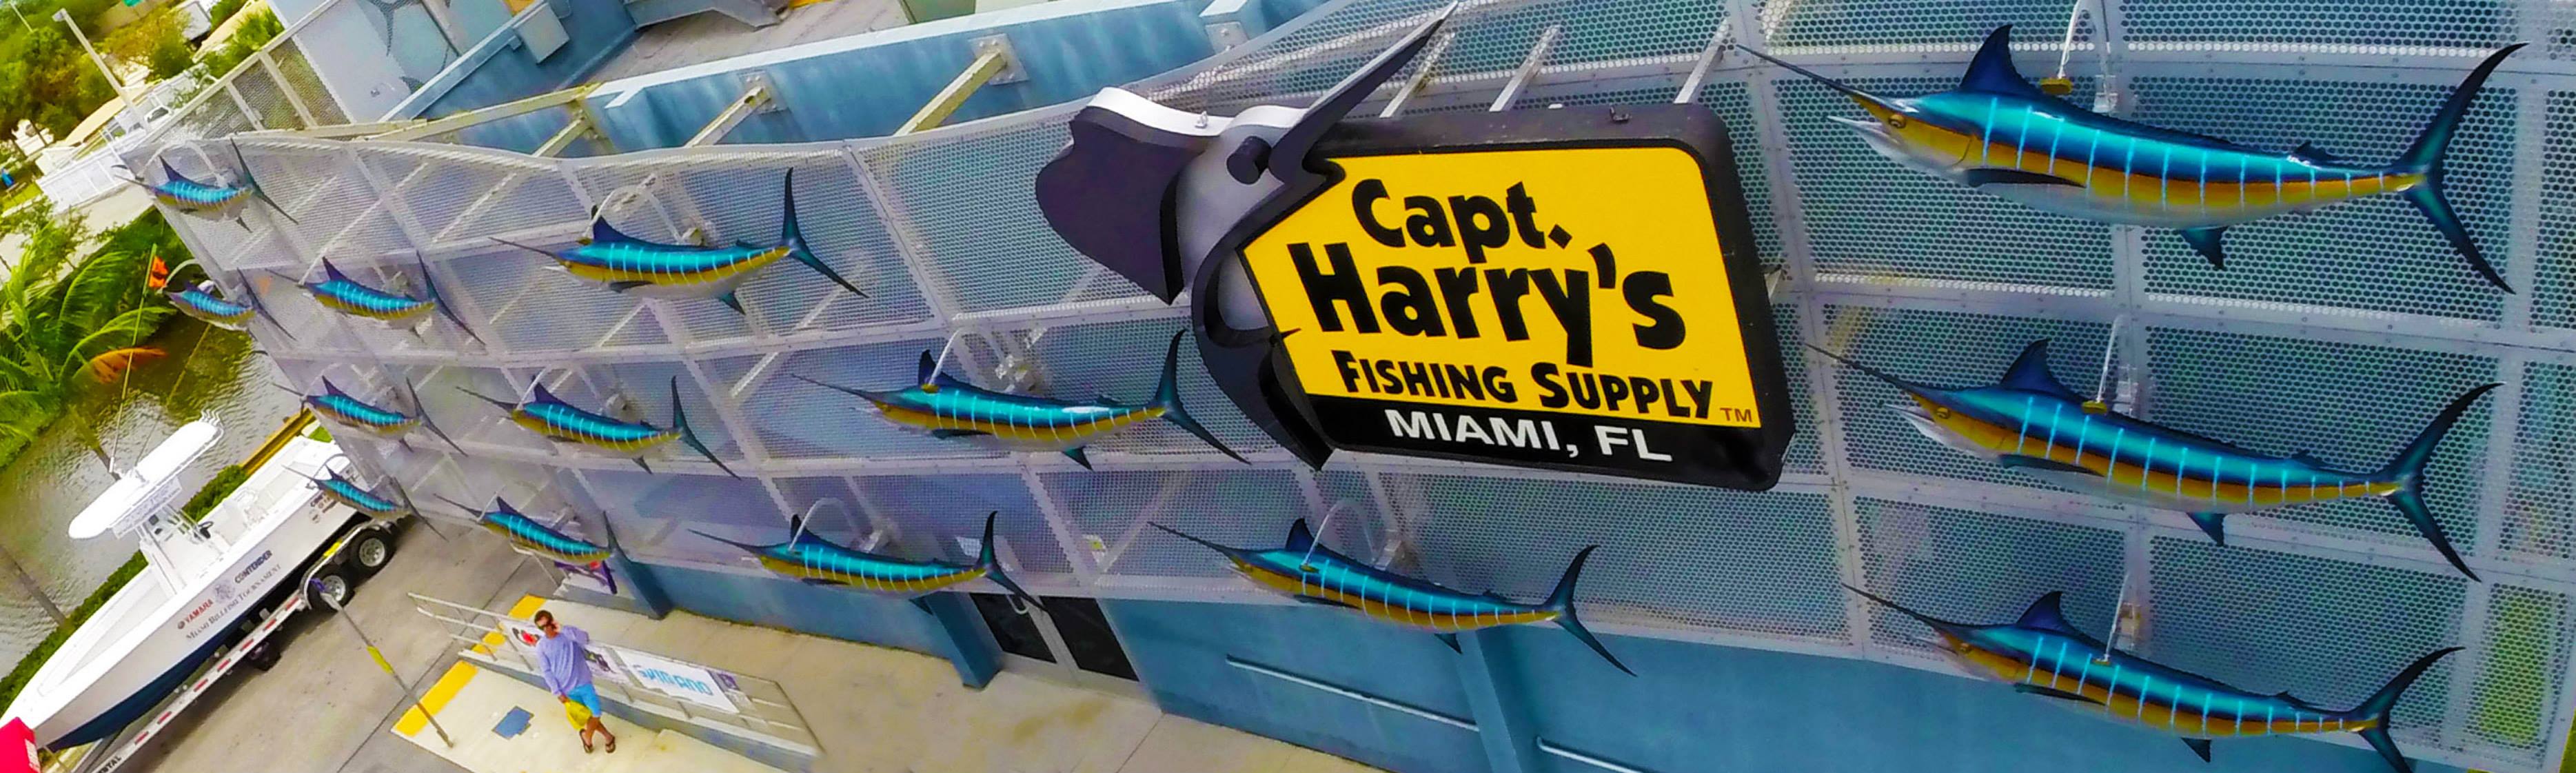 Capt. Harry's Fishing Products – Capt. Harry's Fishing Supply